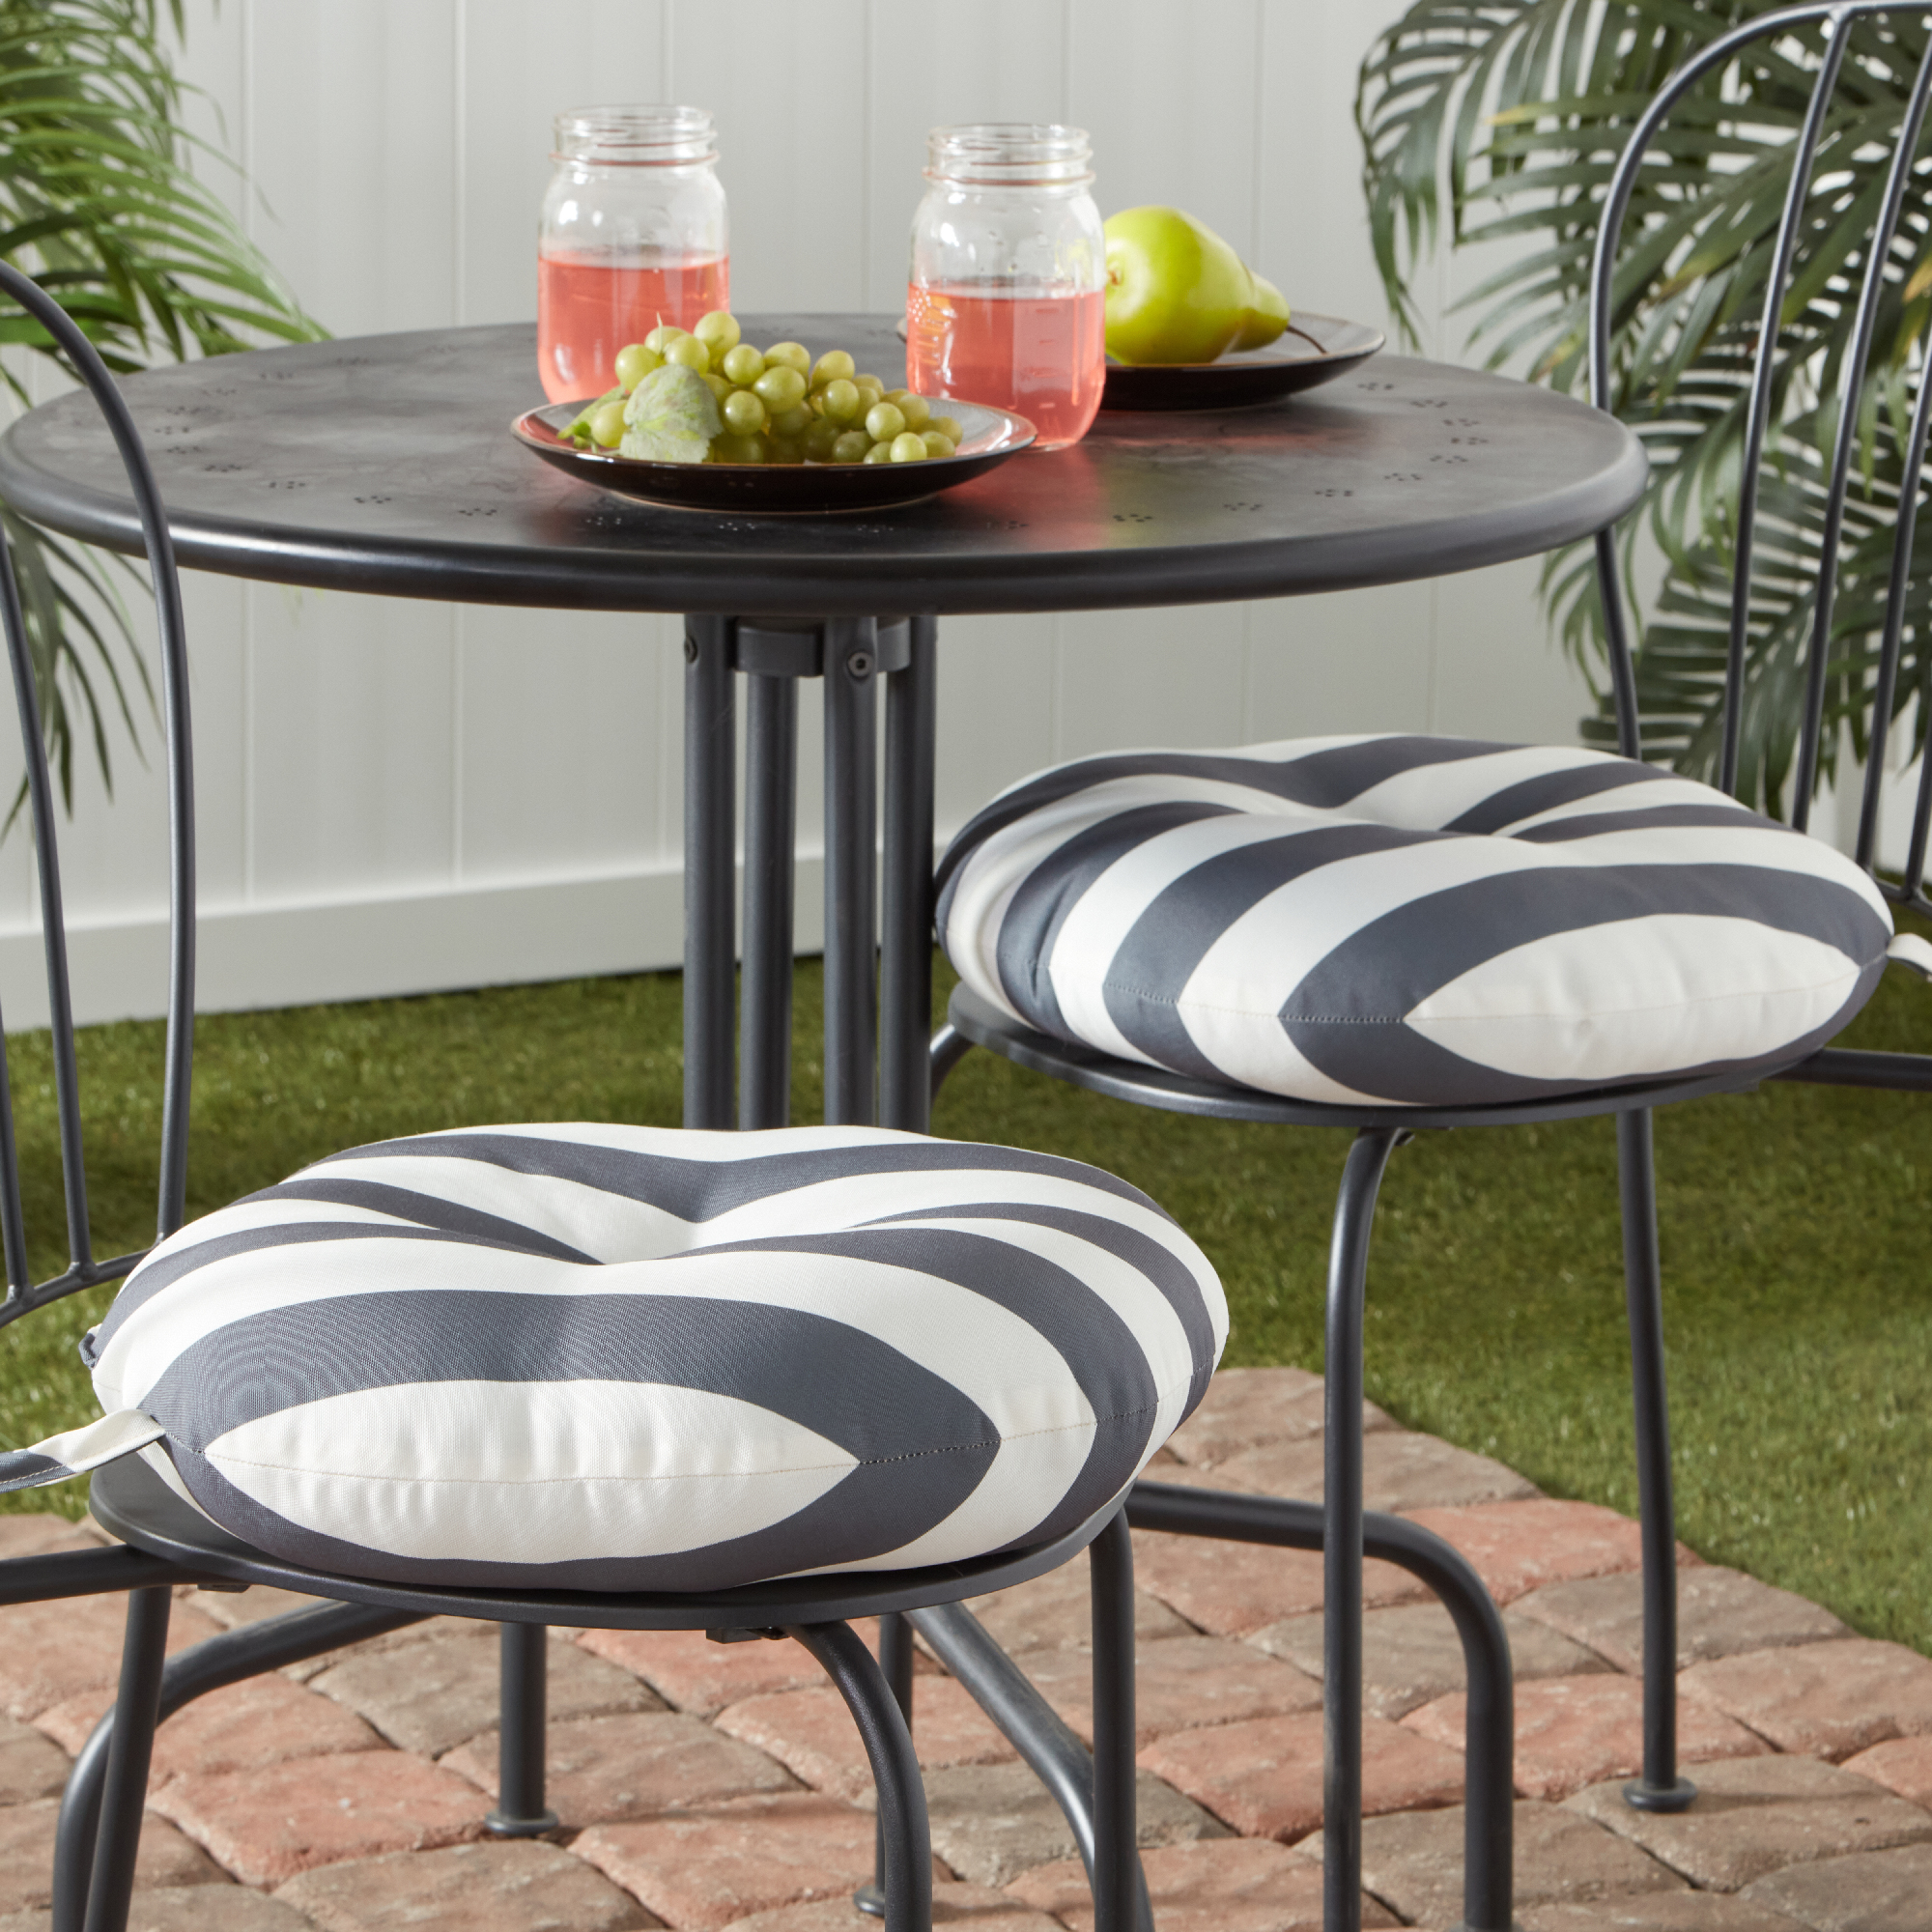 Greendale Home Fashions Canopy Stripe Gray 15 in. Round Outdoor Reversible Bistro Seat Cushion (Set of 2) - image 3 of 6